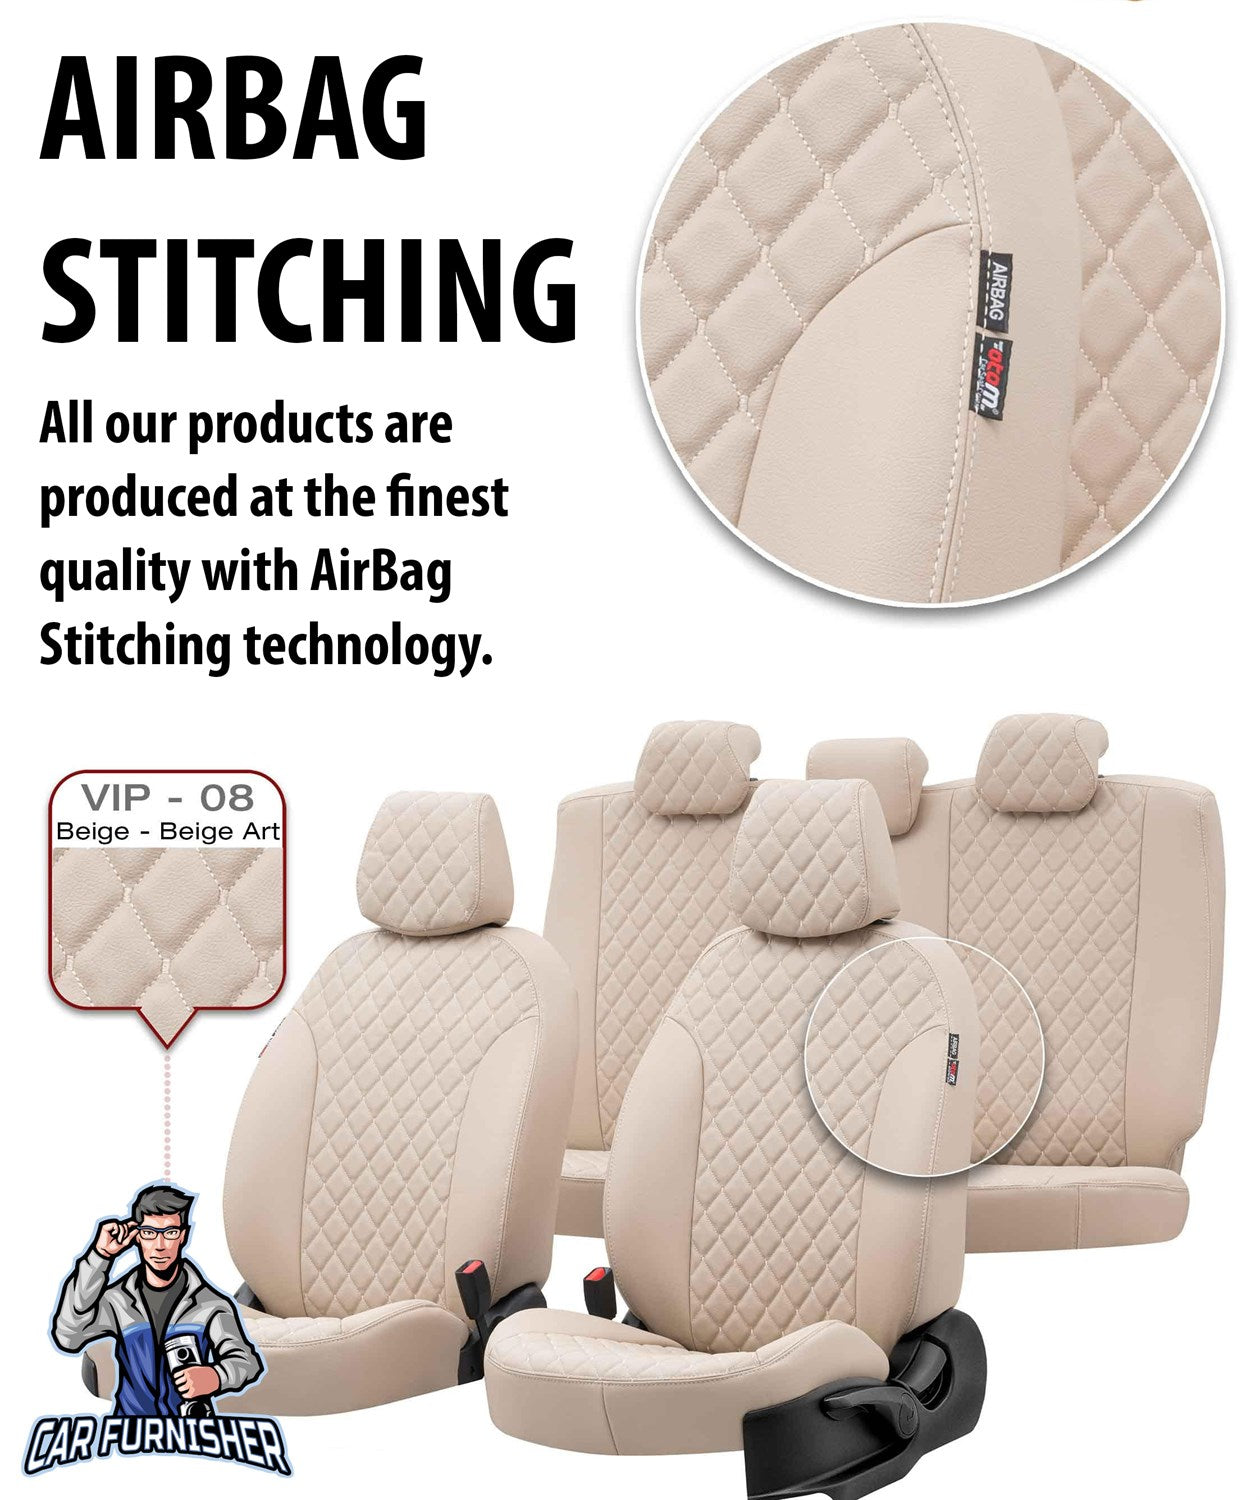 Seat Alhambra Seat Covers Madrid Leather Design Smoked Leather